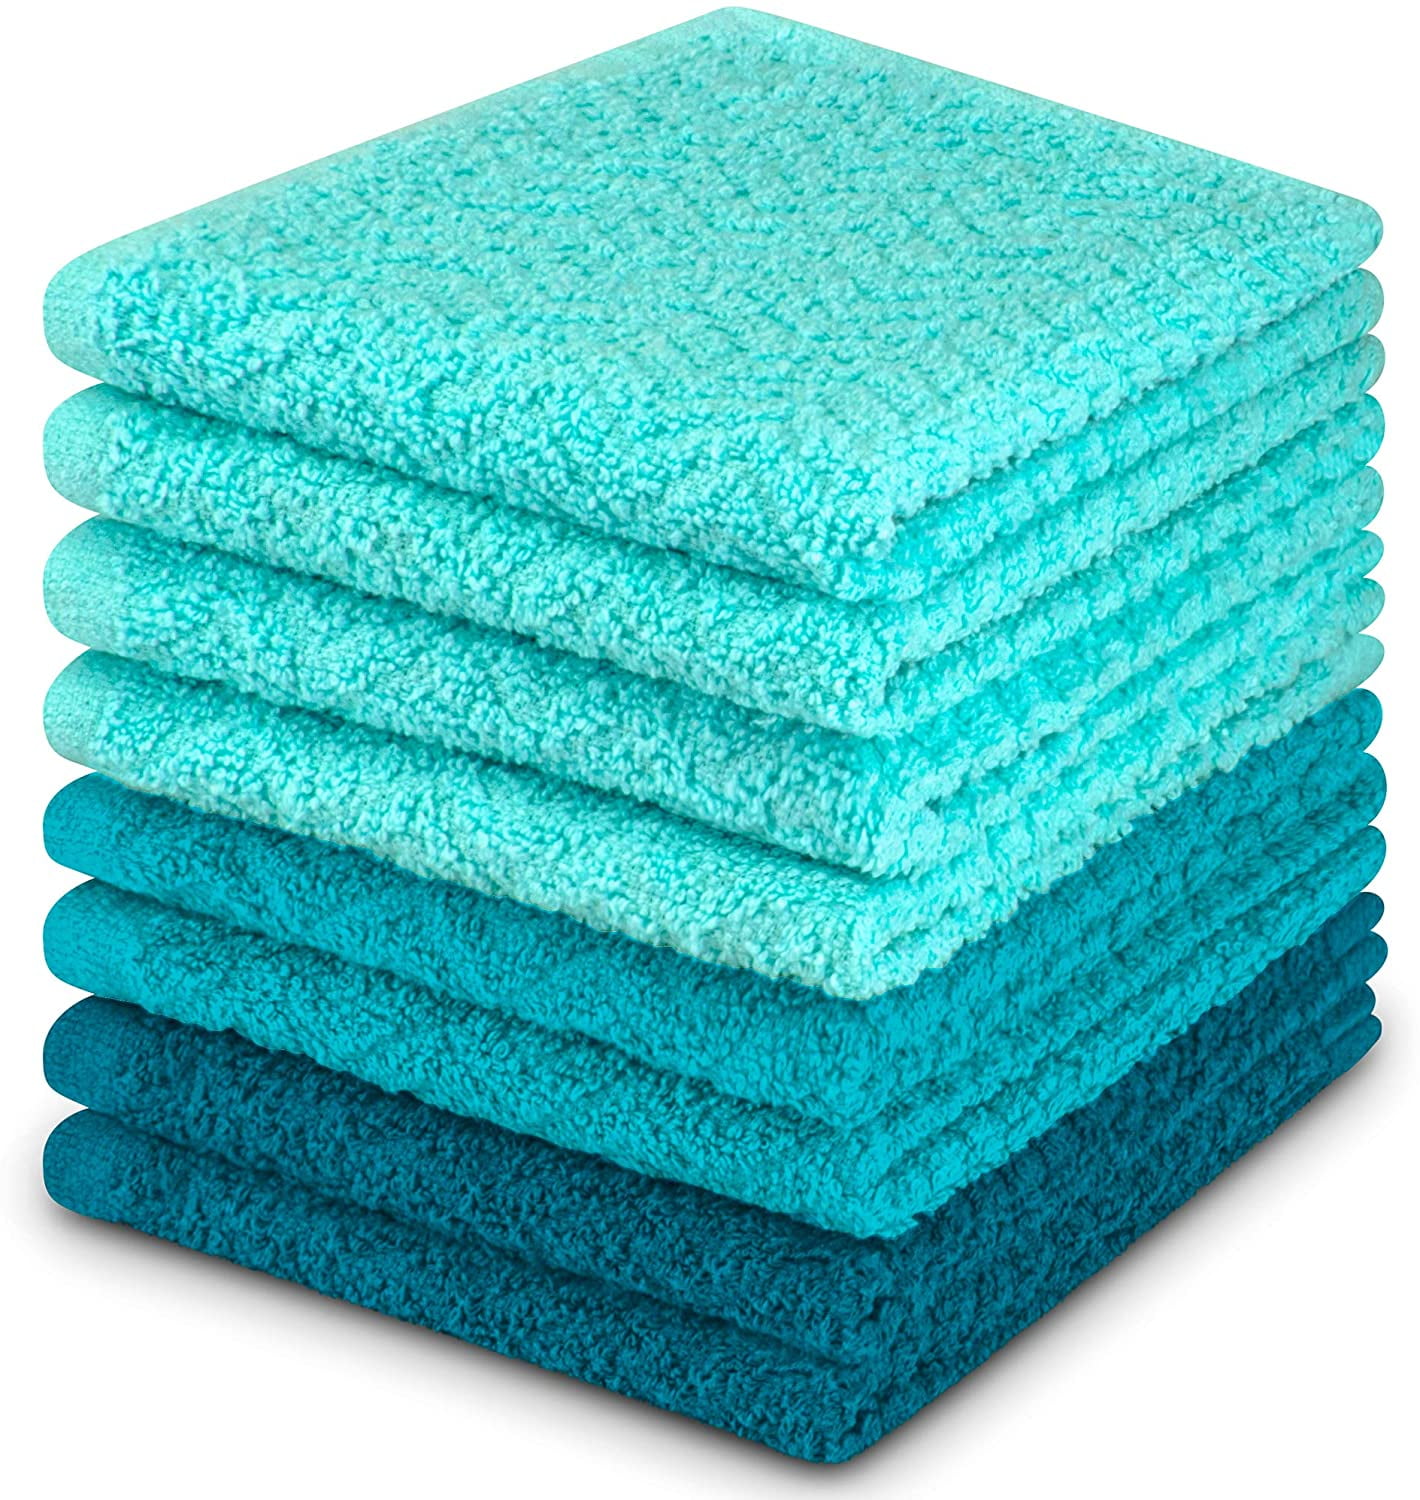 Decorrack 8 Pack Kitchen Dish Towels, 100% Cotton, 12 x 12 inch Dish Cloths, Teal Green (Pack of 8)